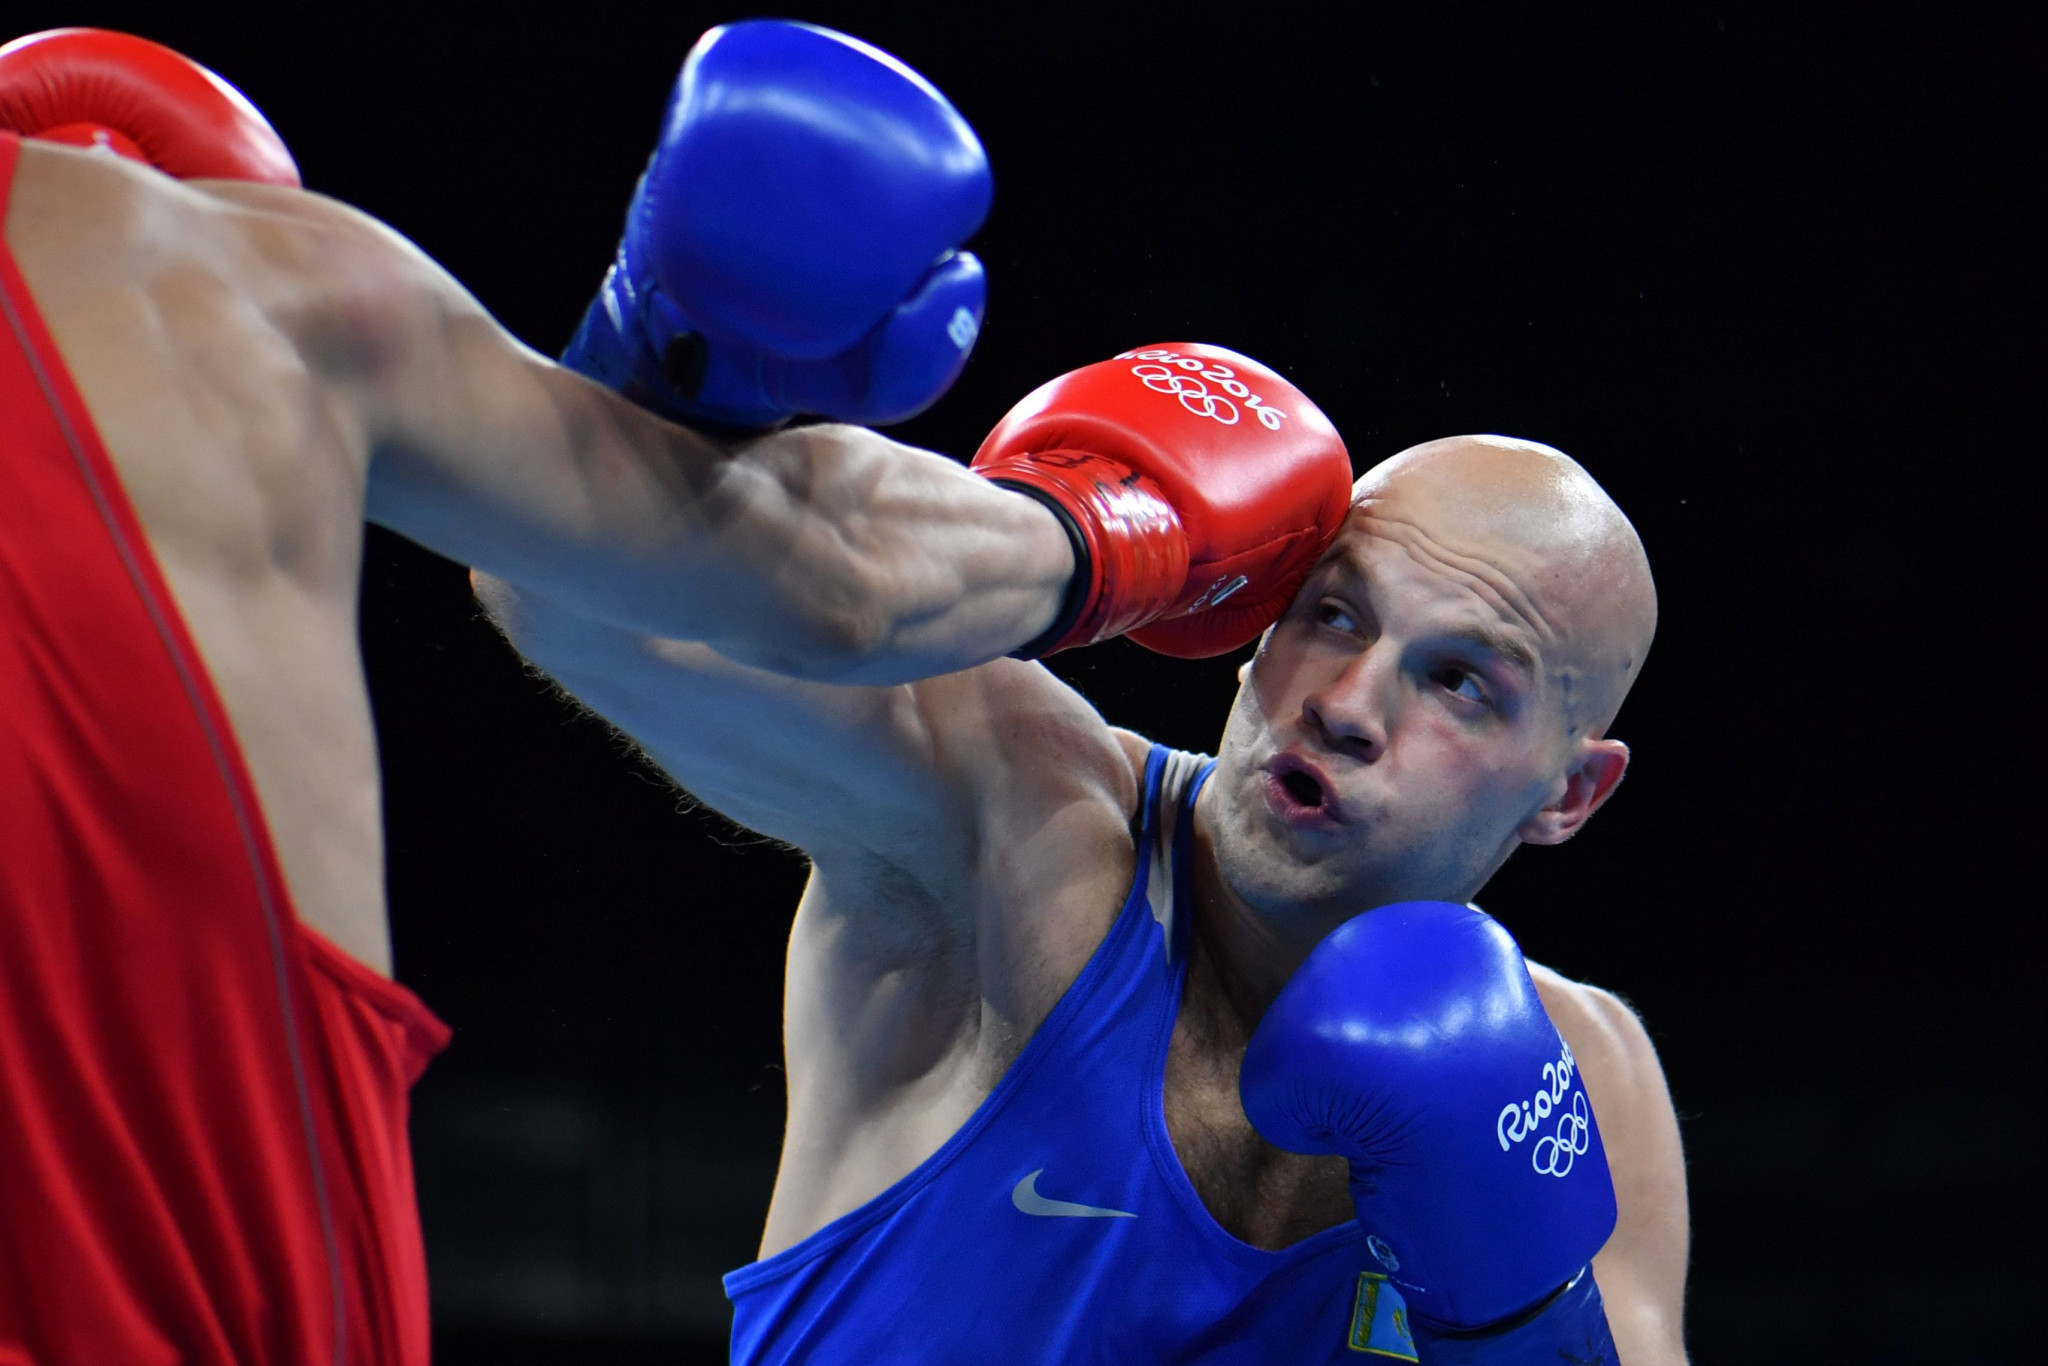 Kazakhstan's Olympic boxers to participate in training camps in the US and Cuba